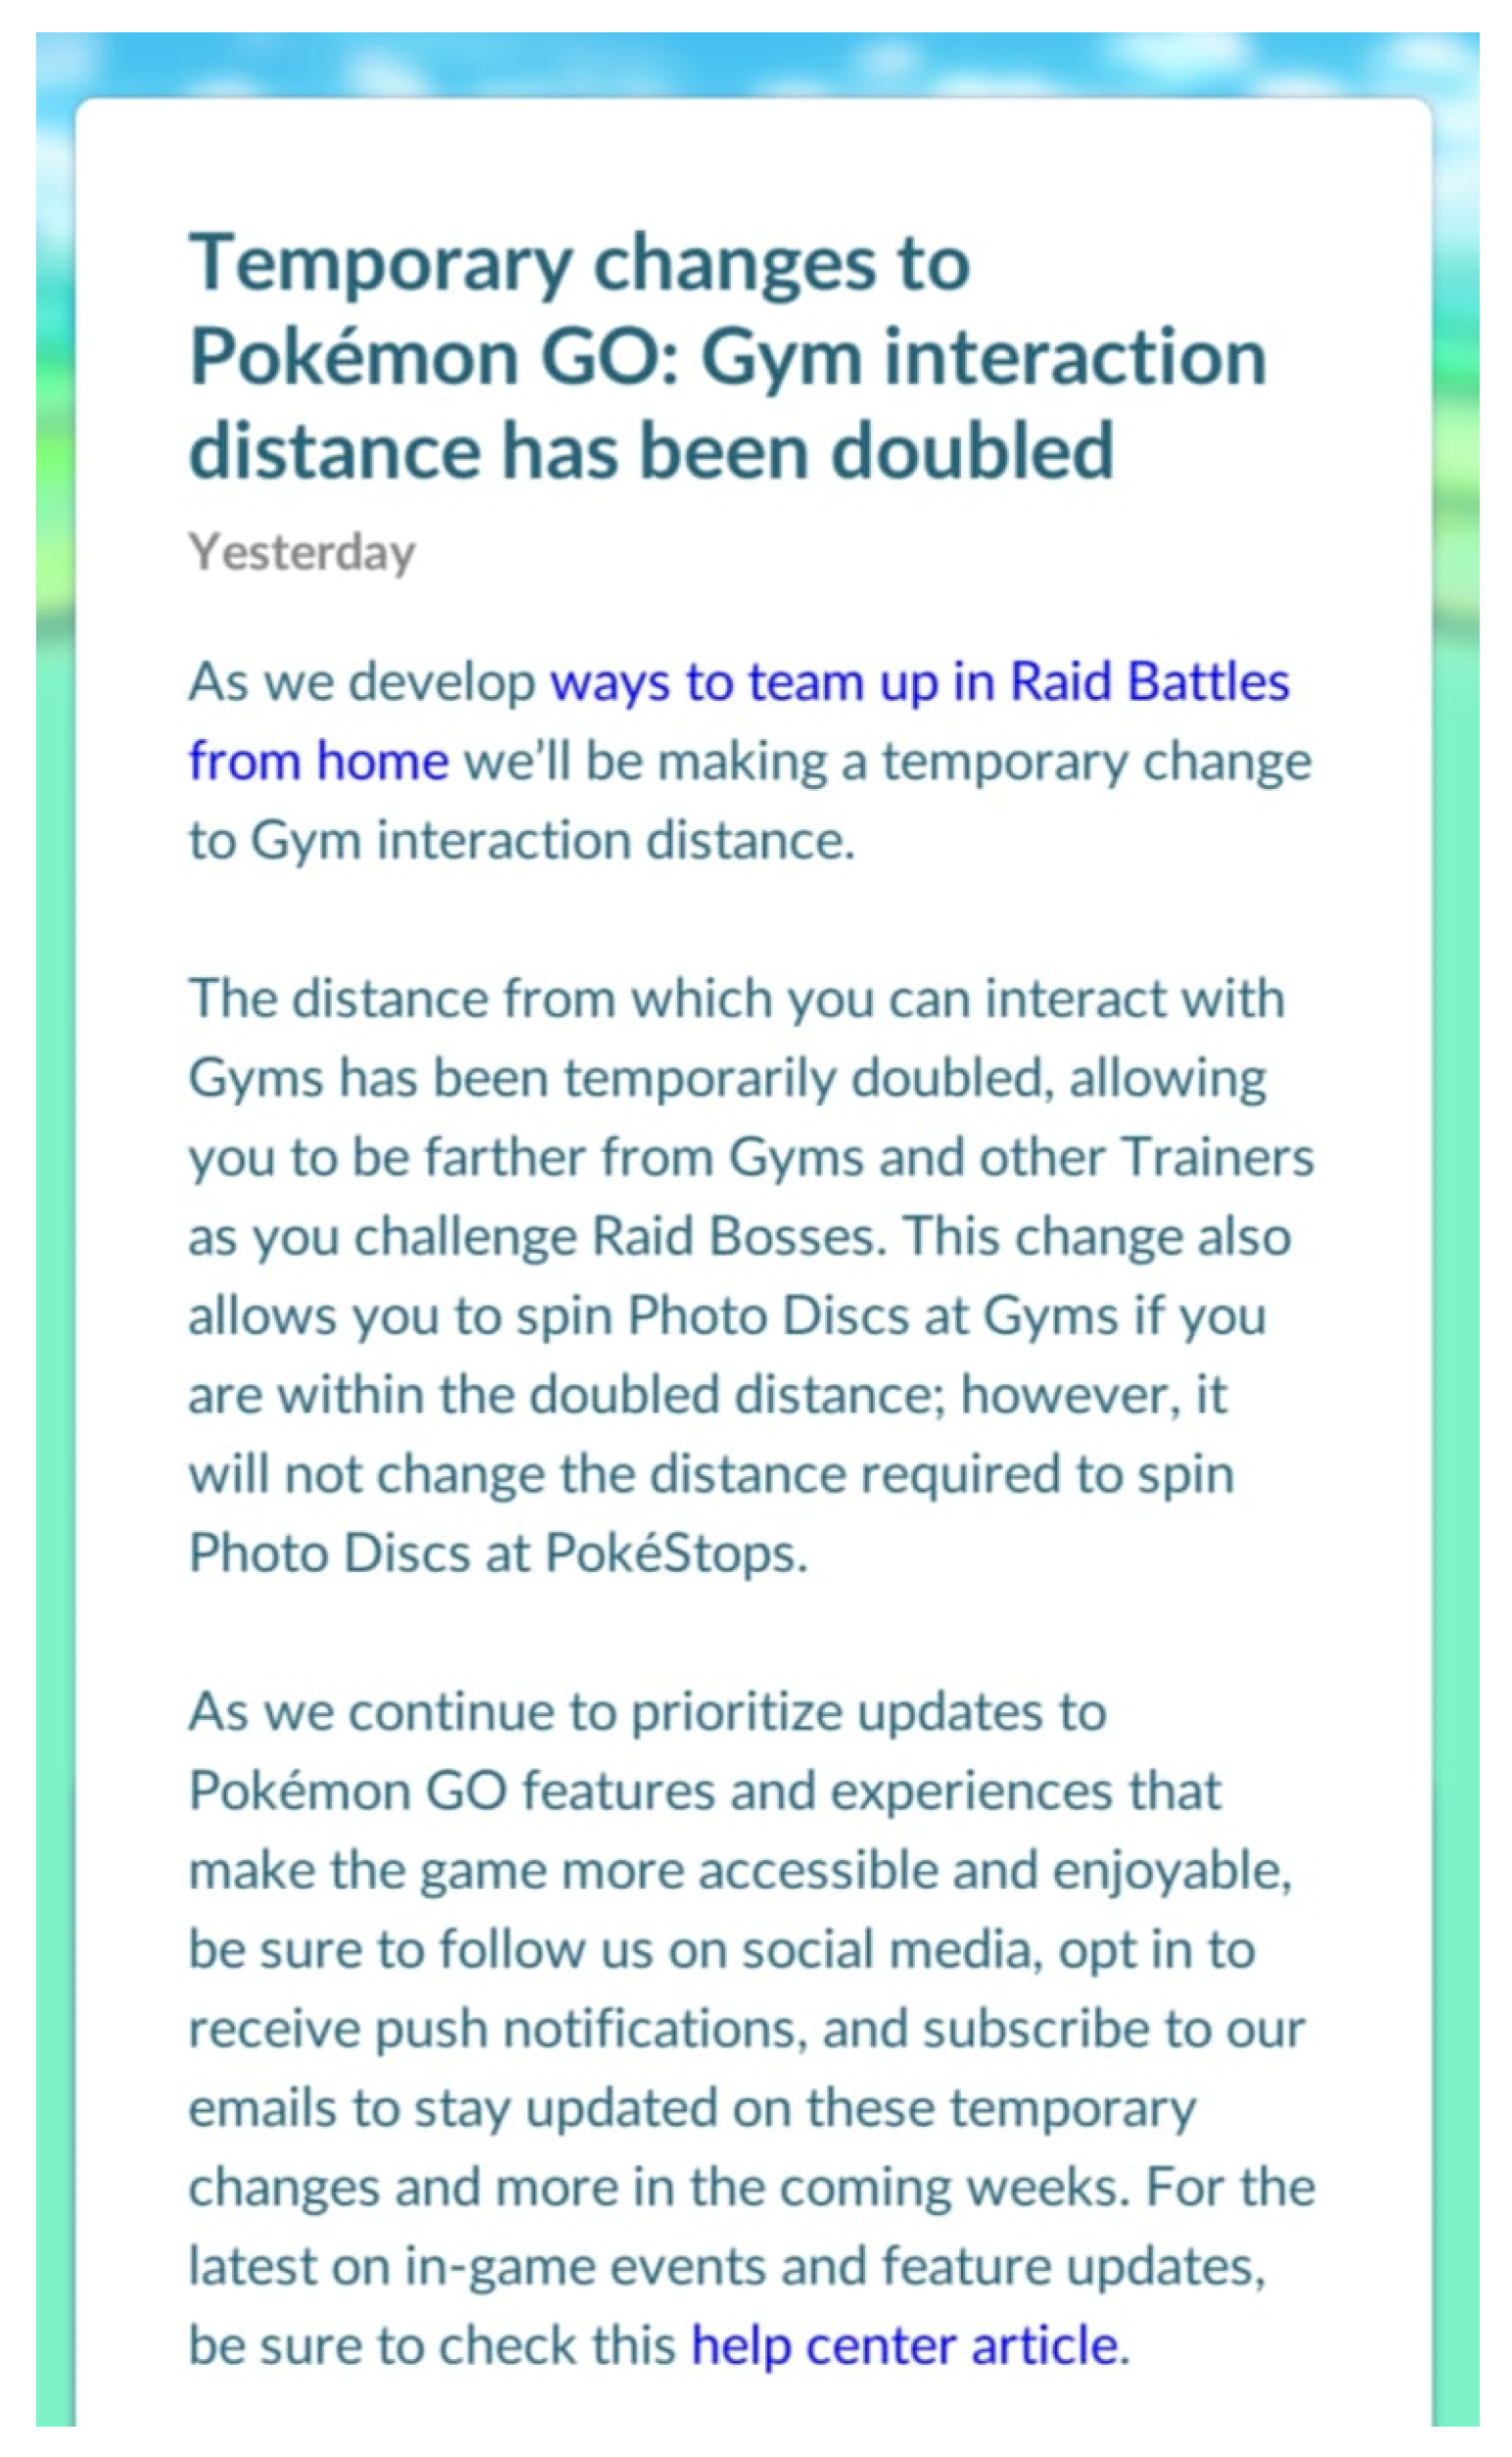 Pokémon Go' Dev Niantic Accepting City Submissions For Live Events